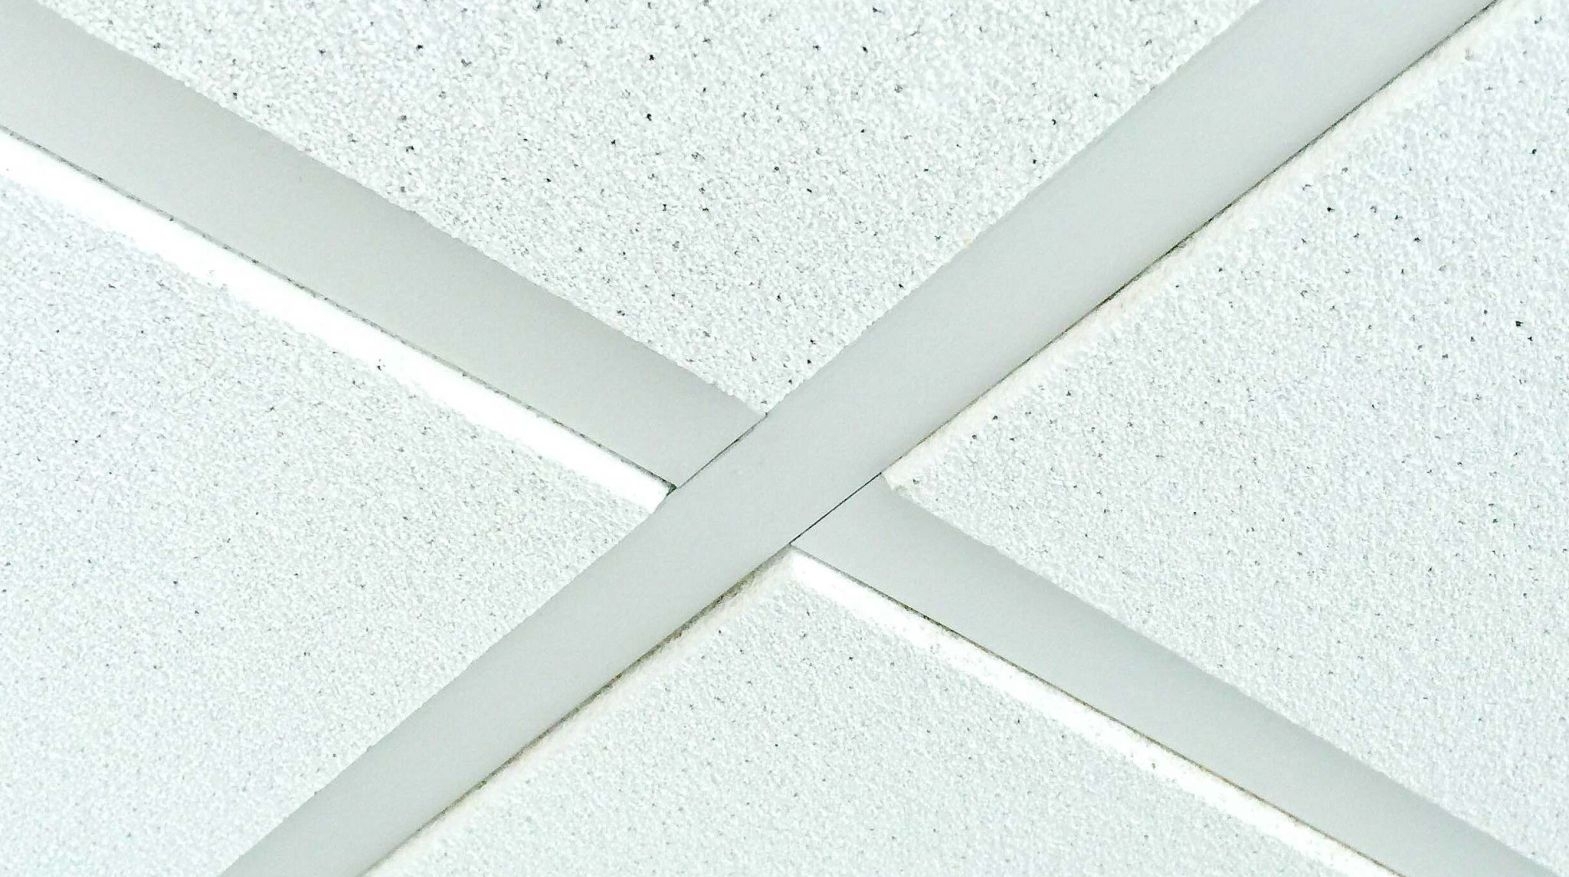 Armstrong Cortega Ceiling Tiles Second Look Armstrong Cortega Ceiling Tiles Second Look armstrong cortega ceiling tiles second look ceiling tiles 1569 X 877